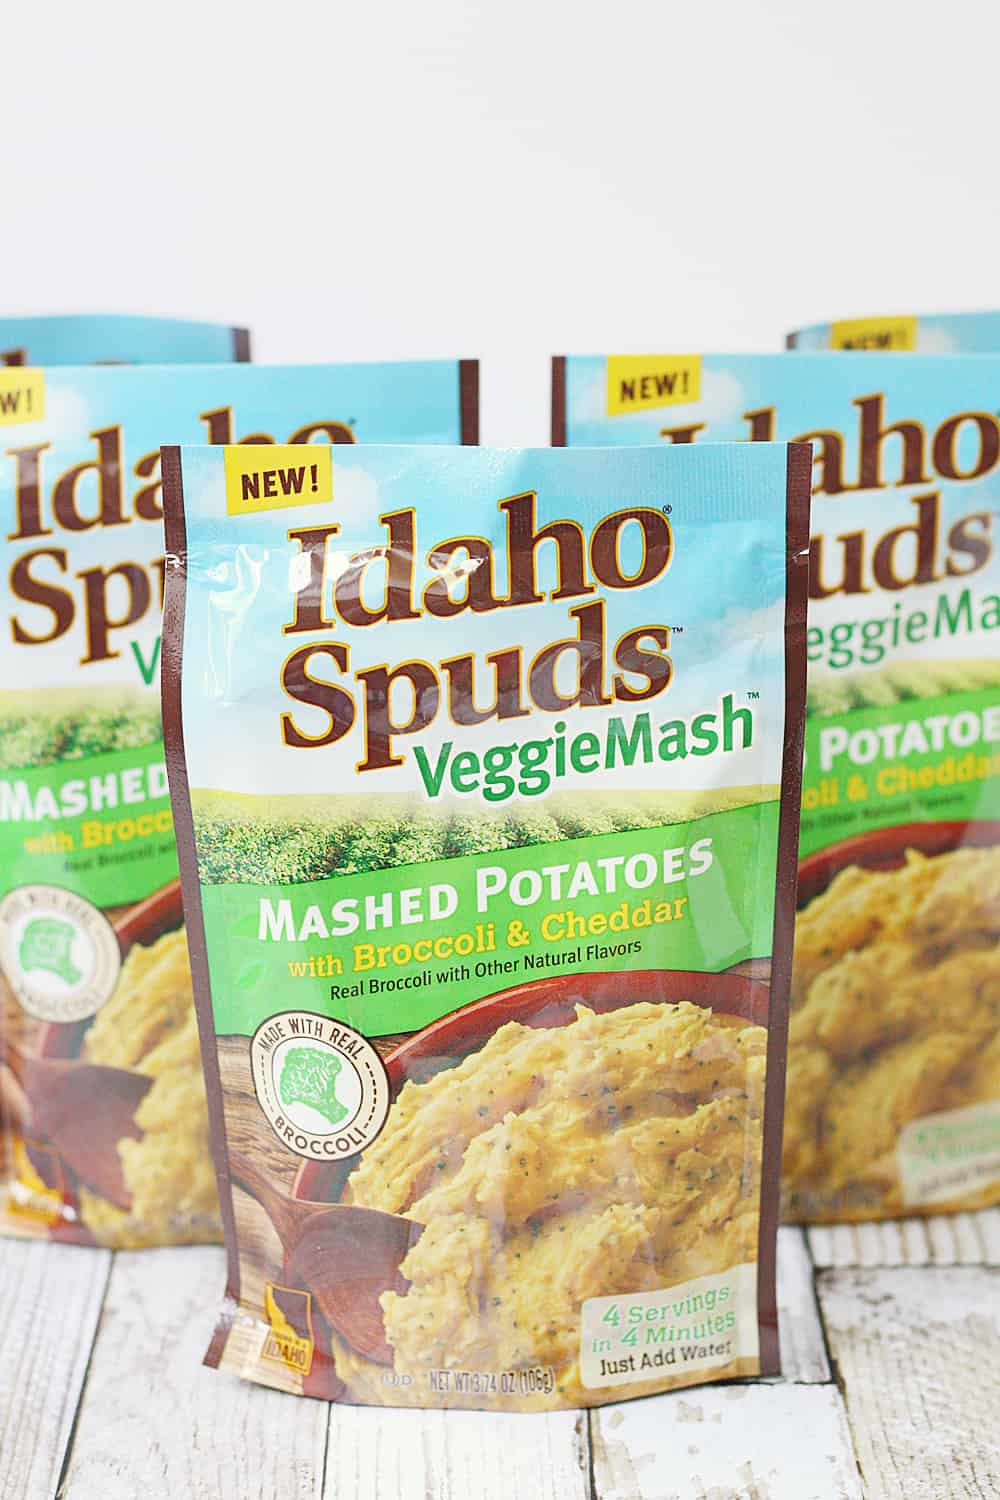 New Idaho Spuds VeggieMash for quick and easy weeknight meals